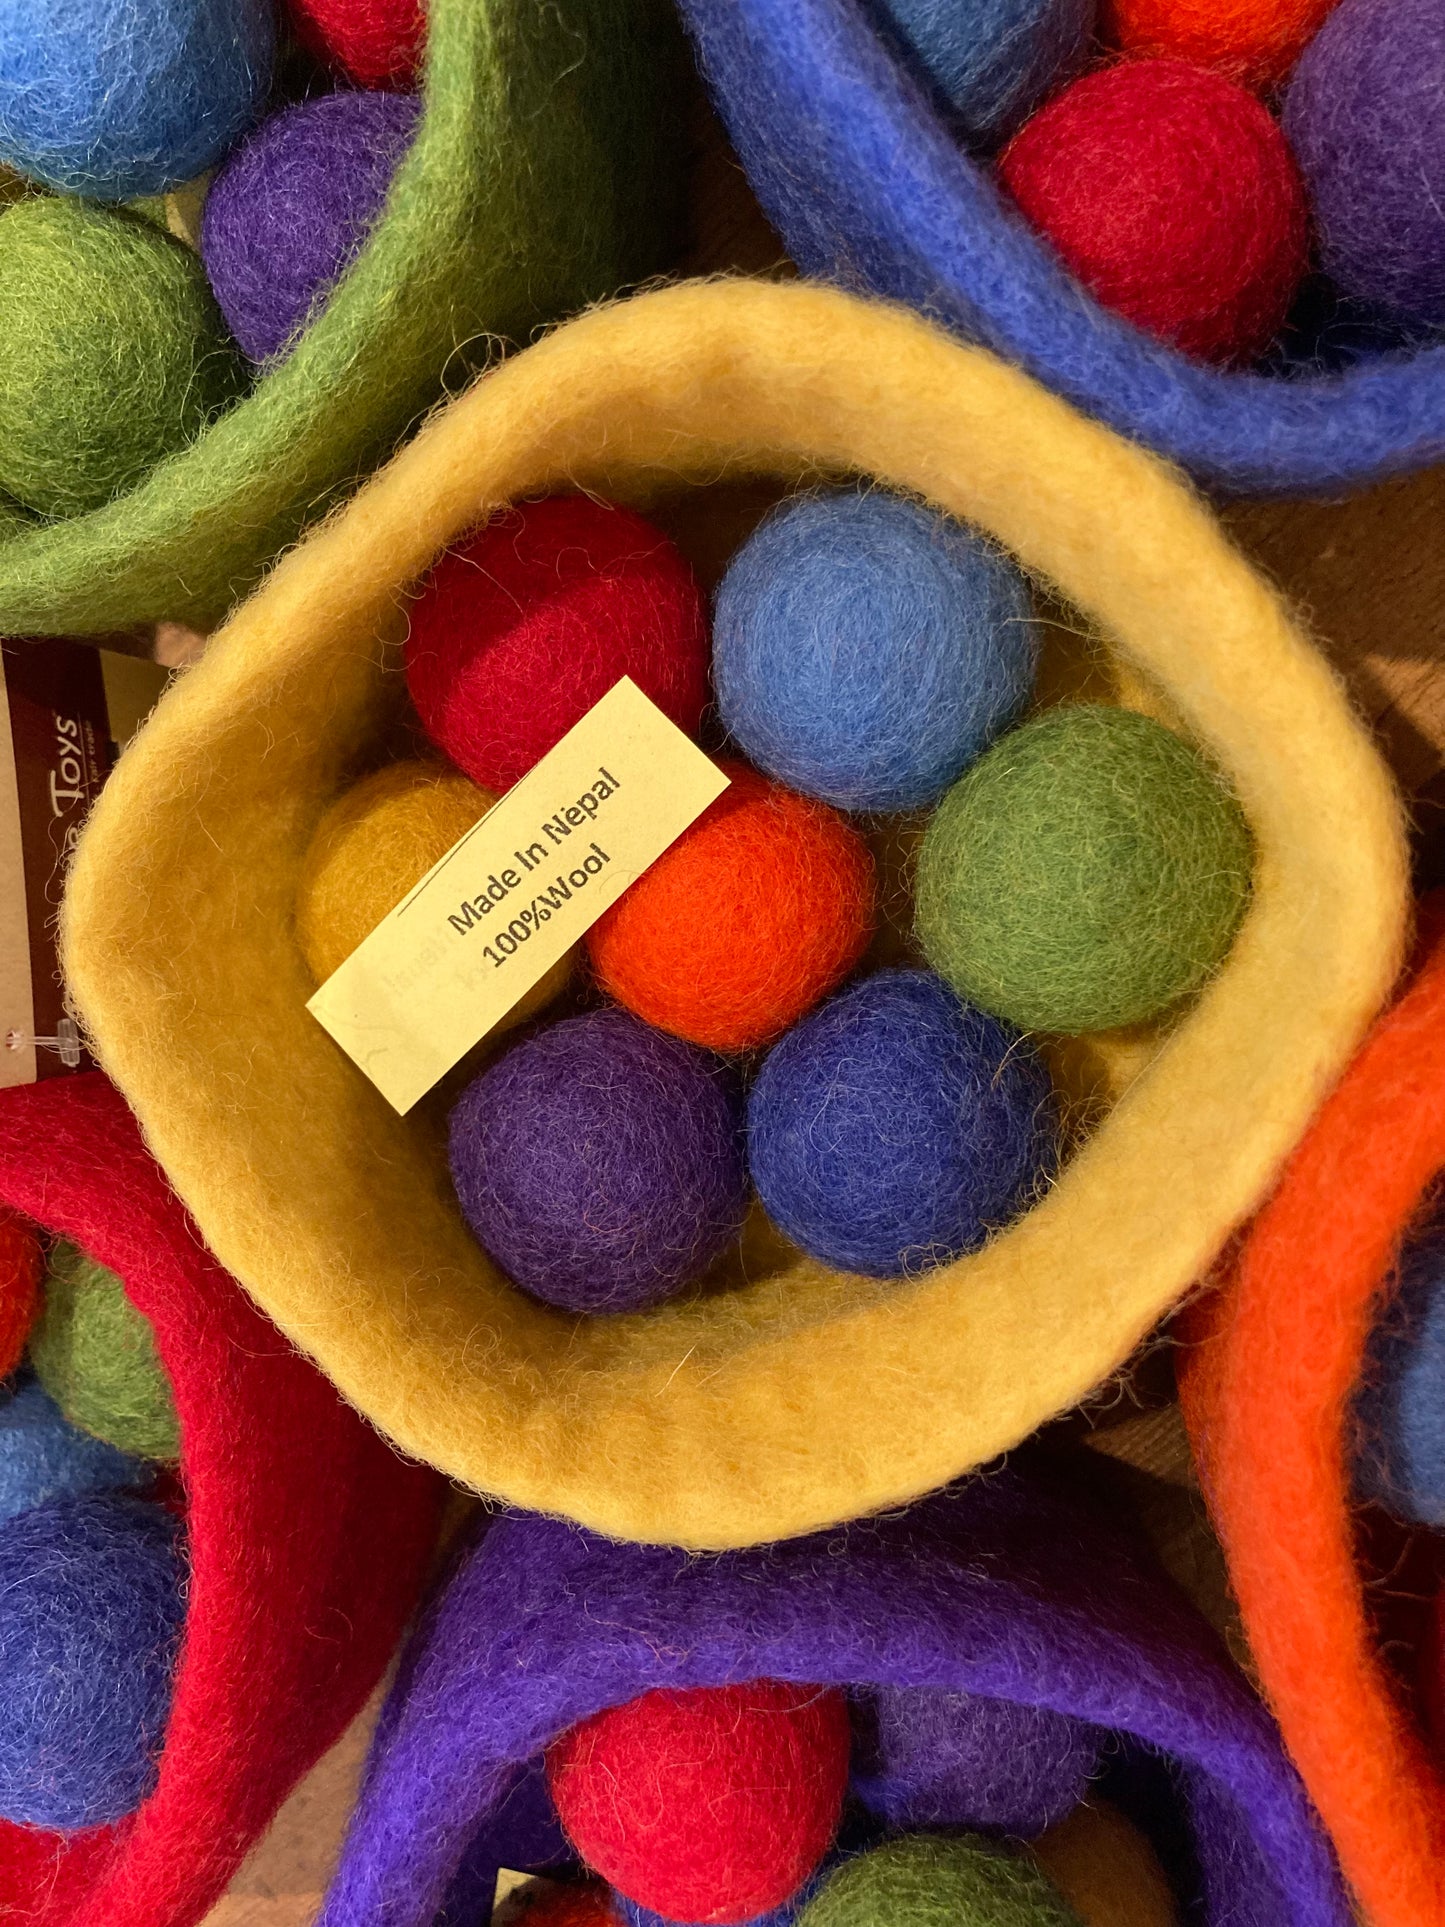 Felted Toys for Baby and Dollhouse Play Set - COLOURED FELT BOWL WITH 7 FELTED BALLS